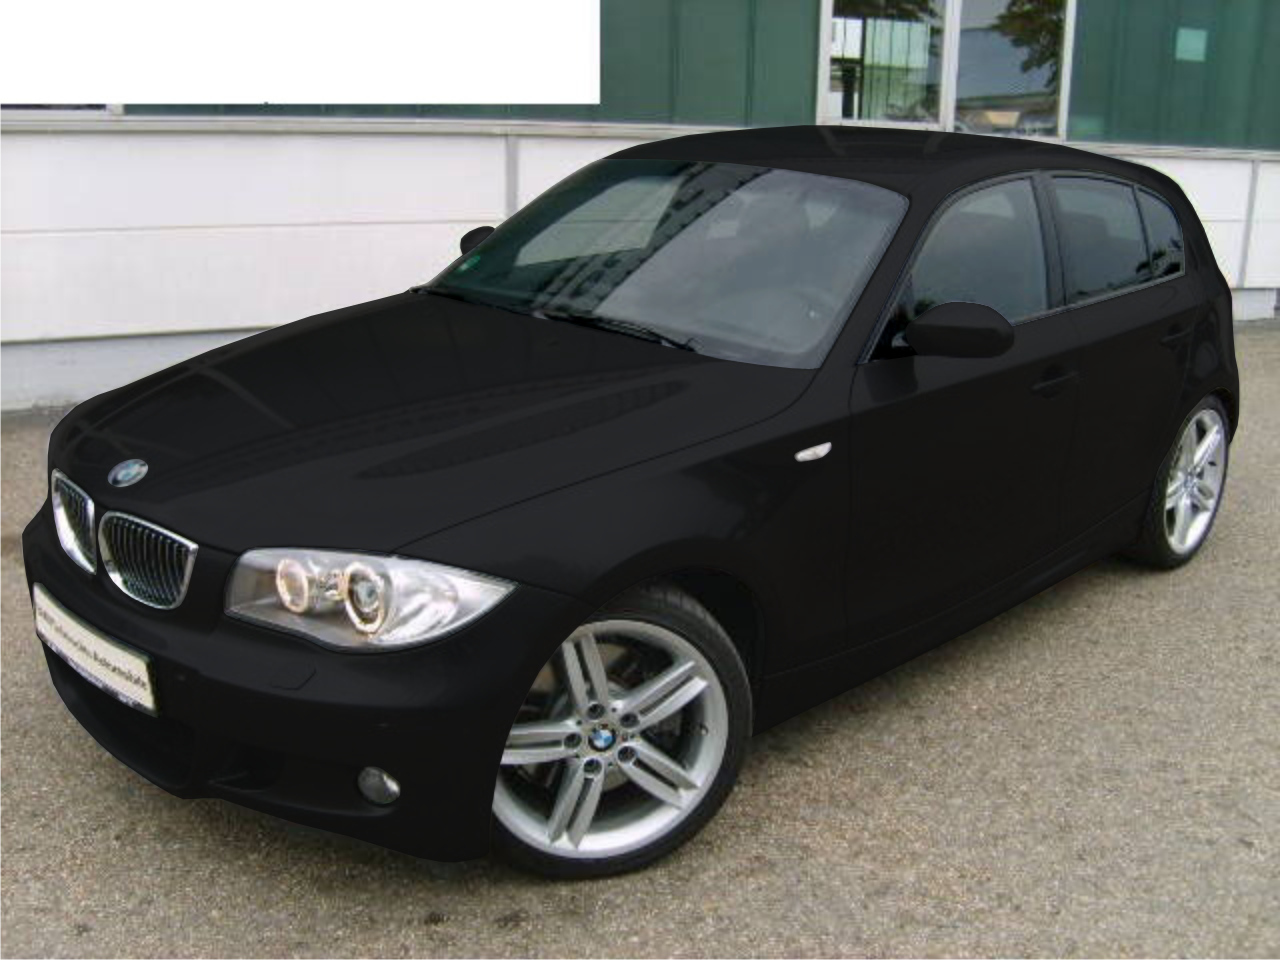 Bmw 118d 10 Review Amazing Pictures And Images Look At The Car